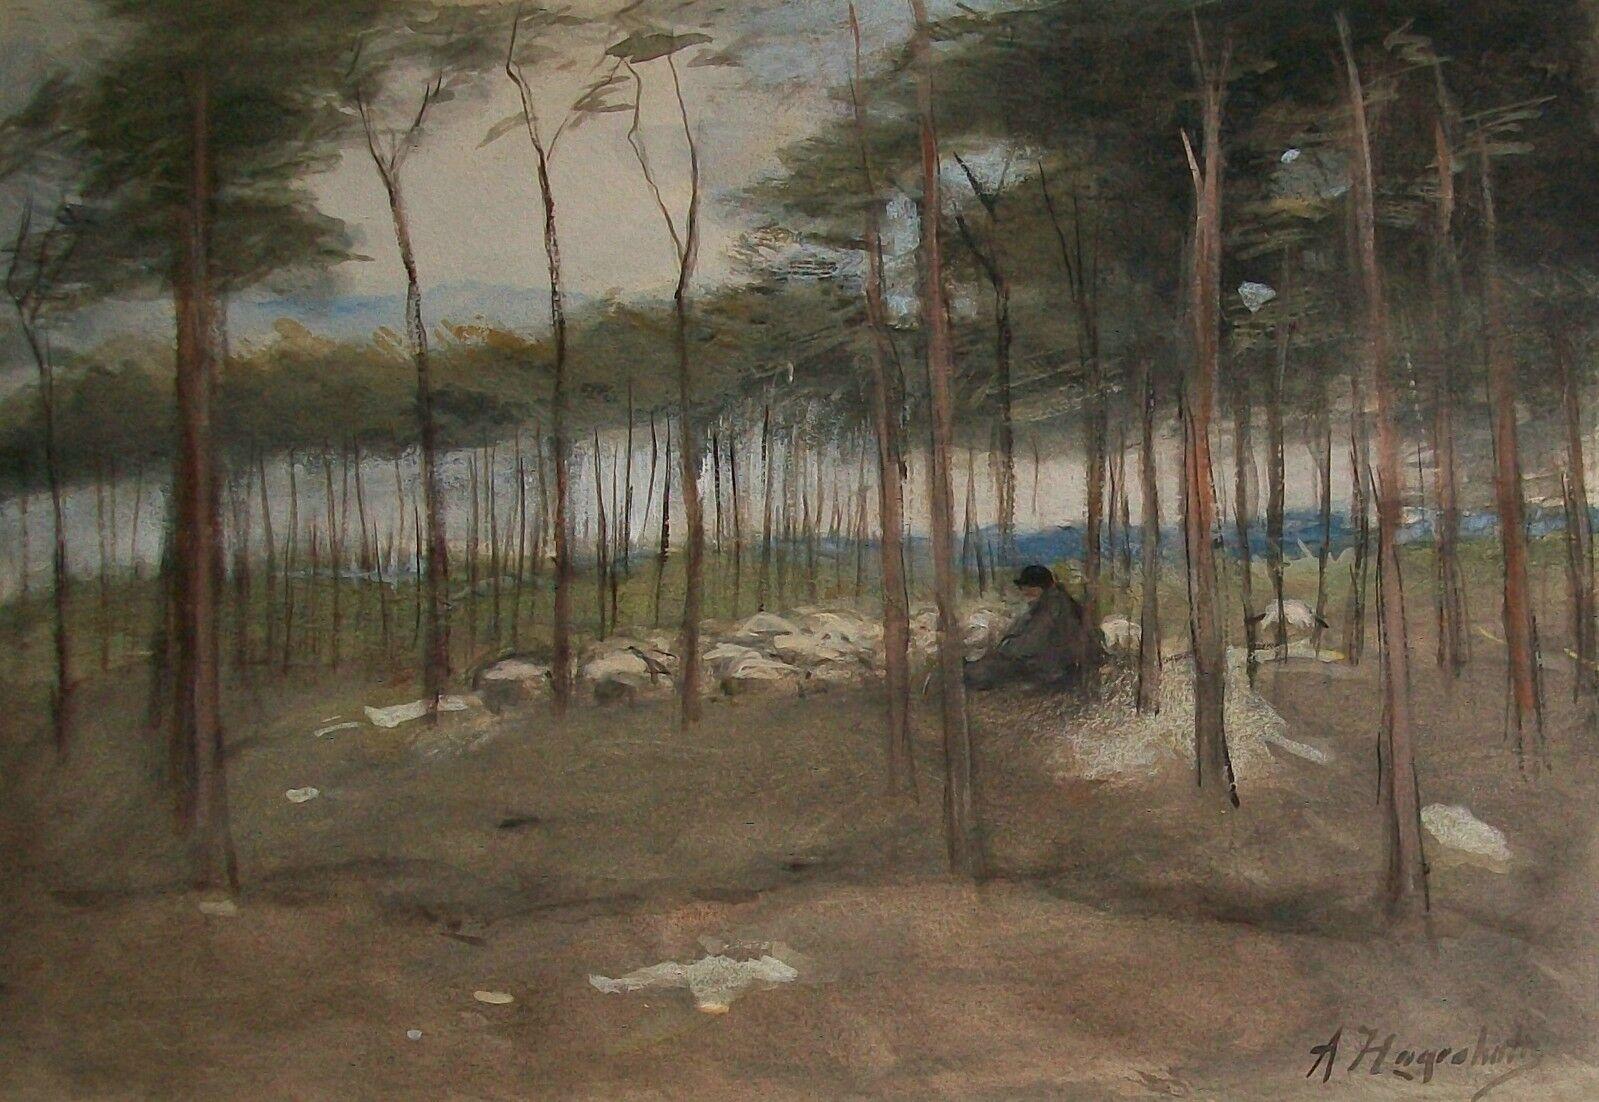 Arina Hugenholtz (1848-1934) - Untitled - Extraordinary watercolor and gouache painting on paper - depicting a shepherd and his sheep resting under trees next to a lake - signed lower right - Netherlands (Laren) - late 19th century.

Excellent